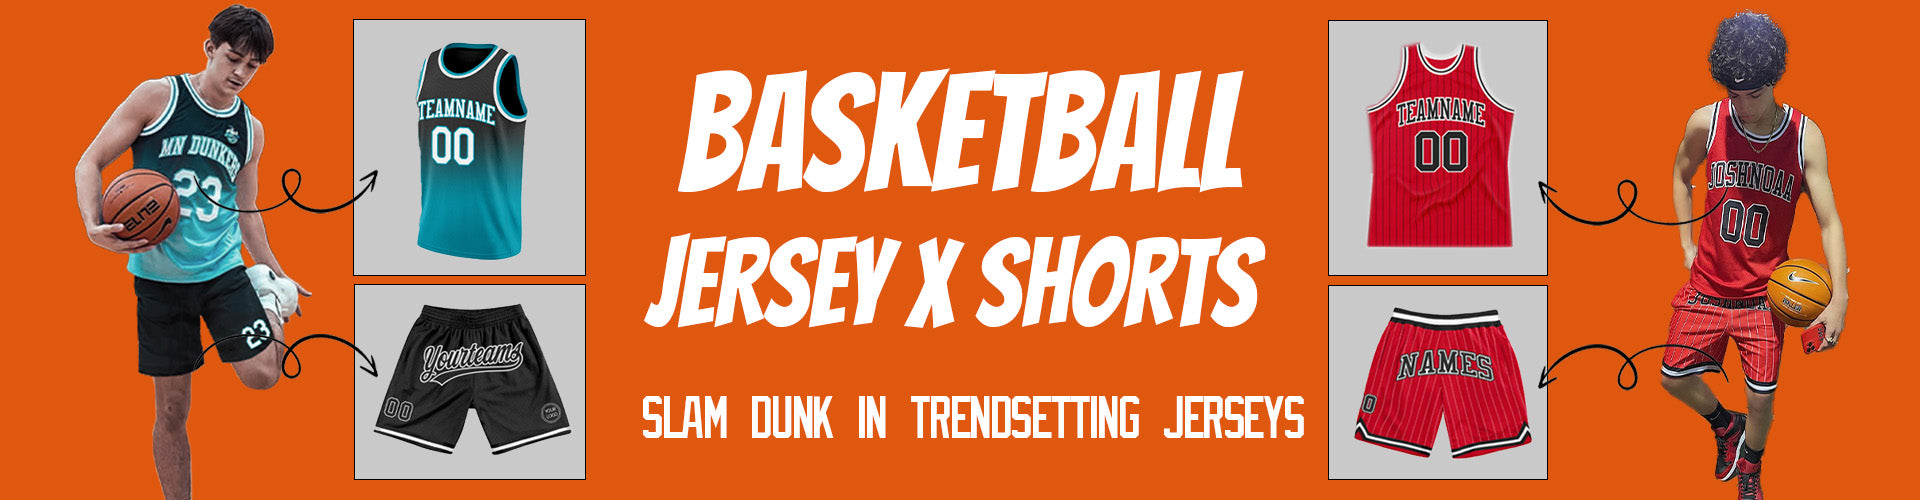 Take Your Game to the Next Level: A Sports OOTD Guide with Custom Basketball Jerseys and Shorts